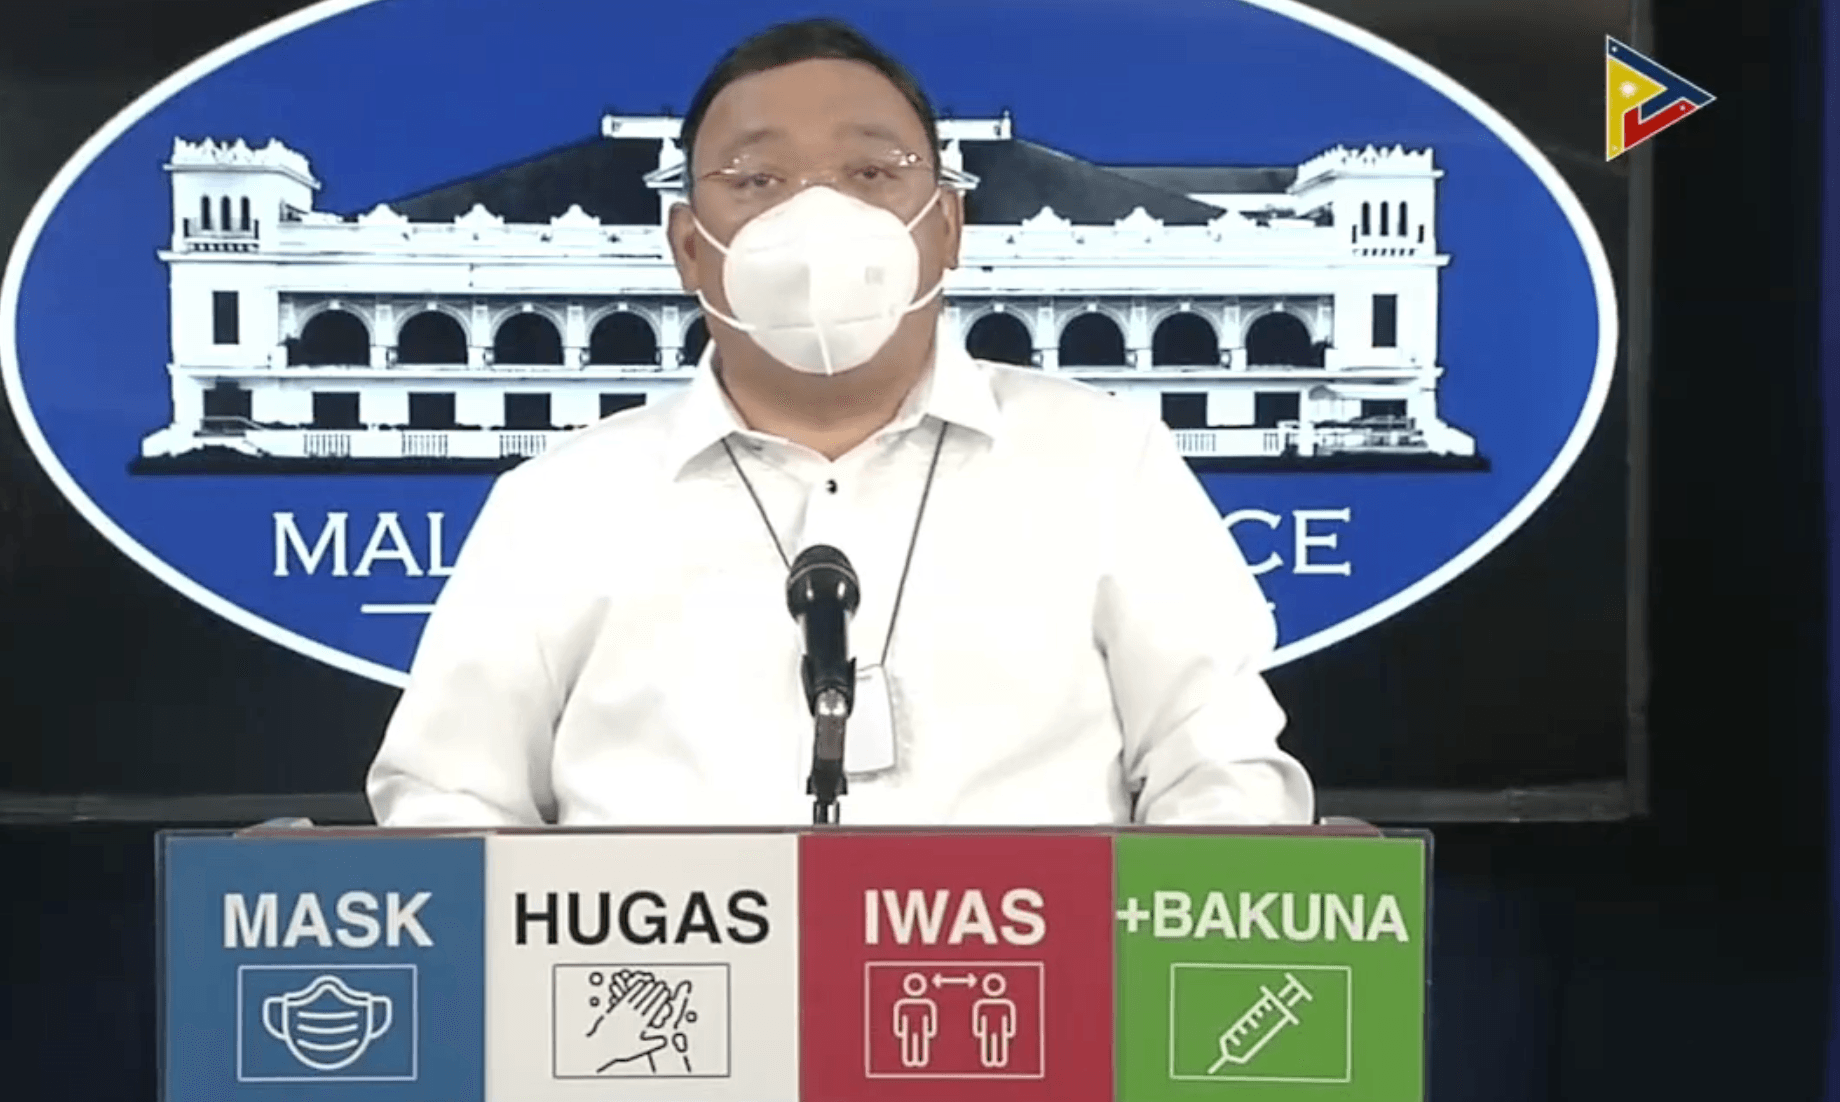 WATCH: Roque says swarming at vaccine sites due to fake news, not Duterte threat